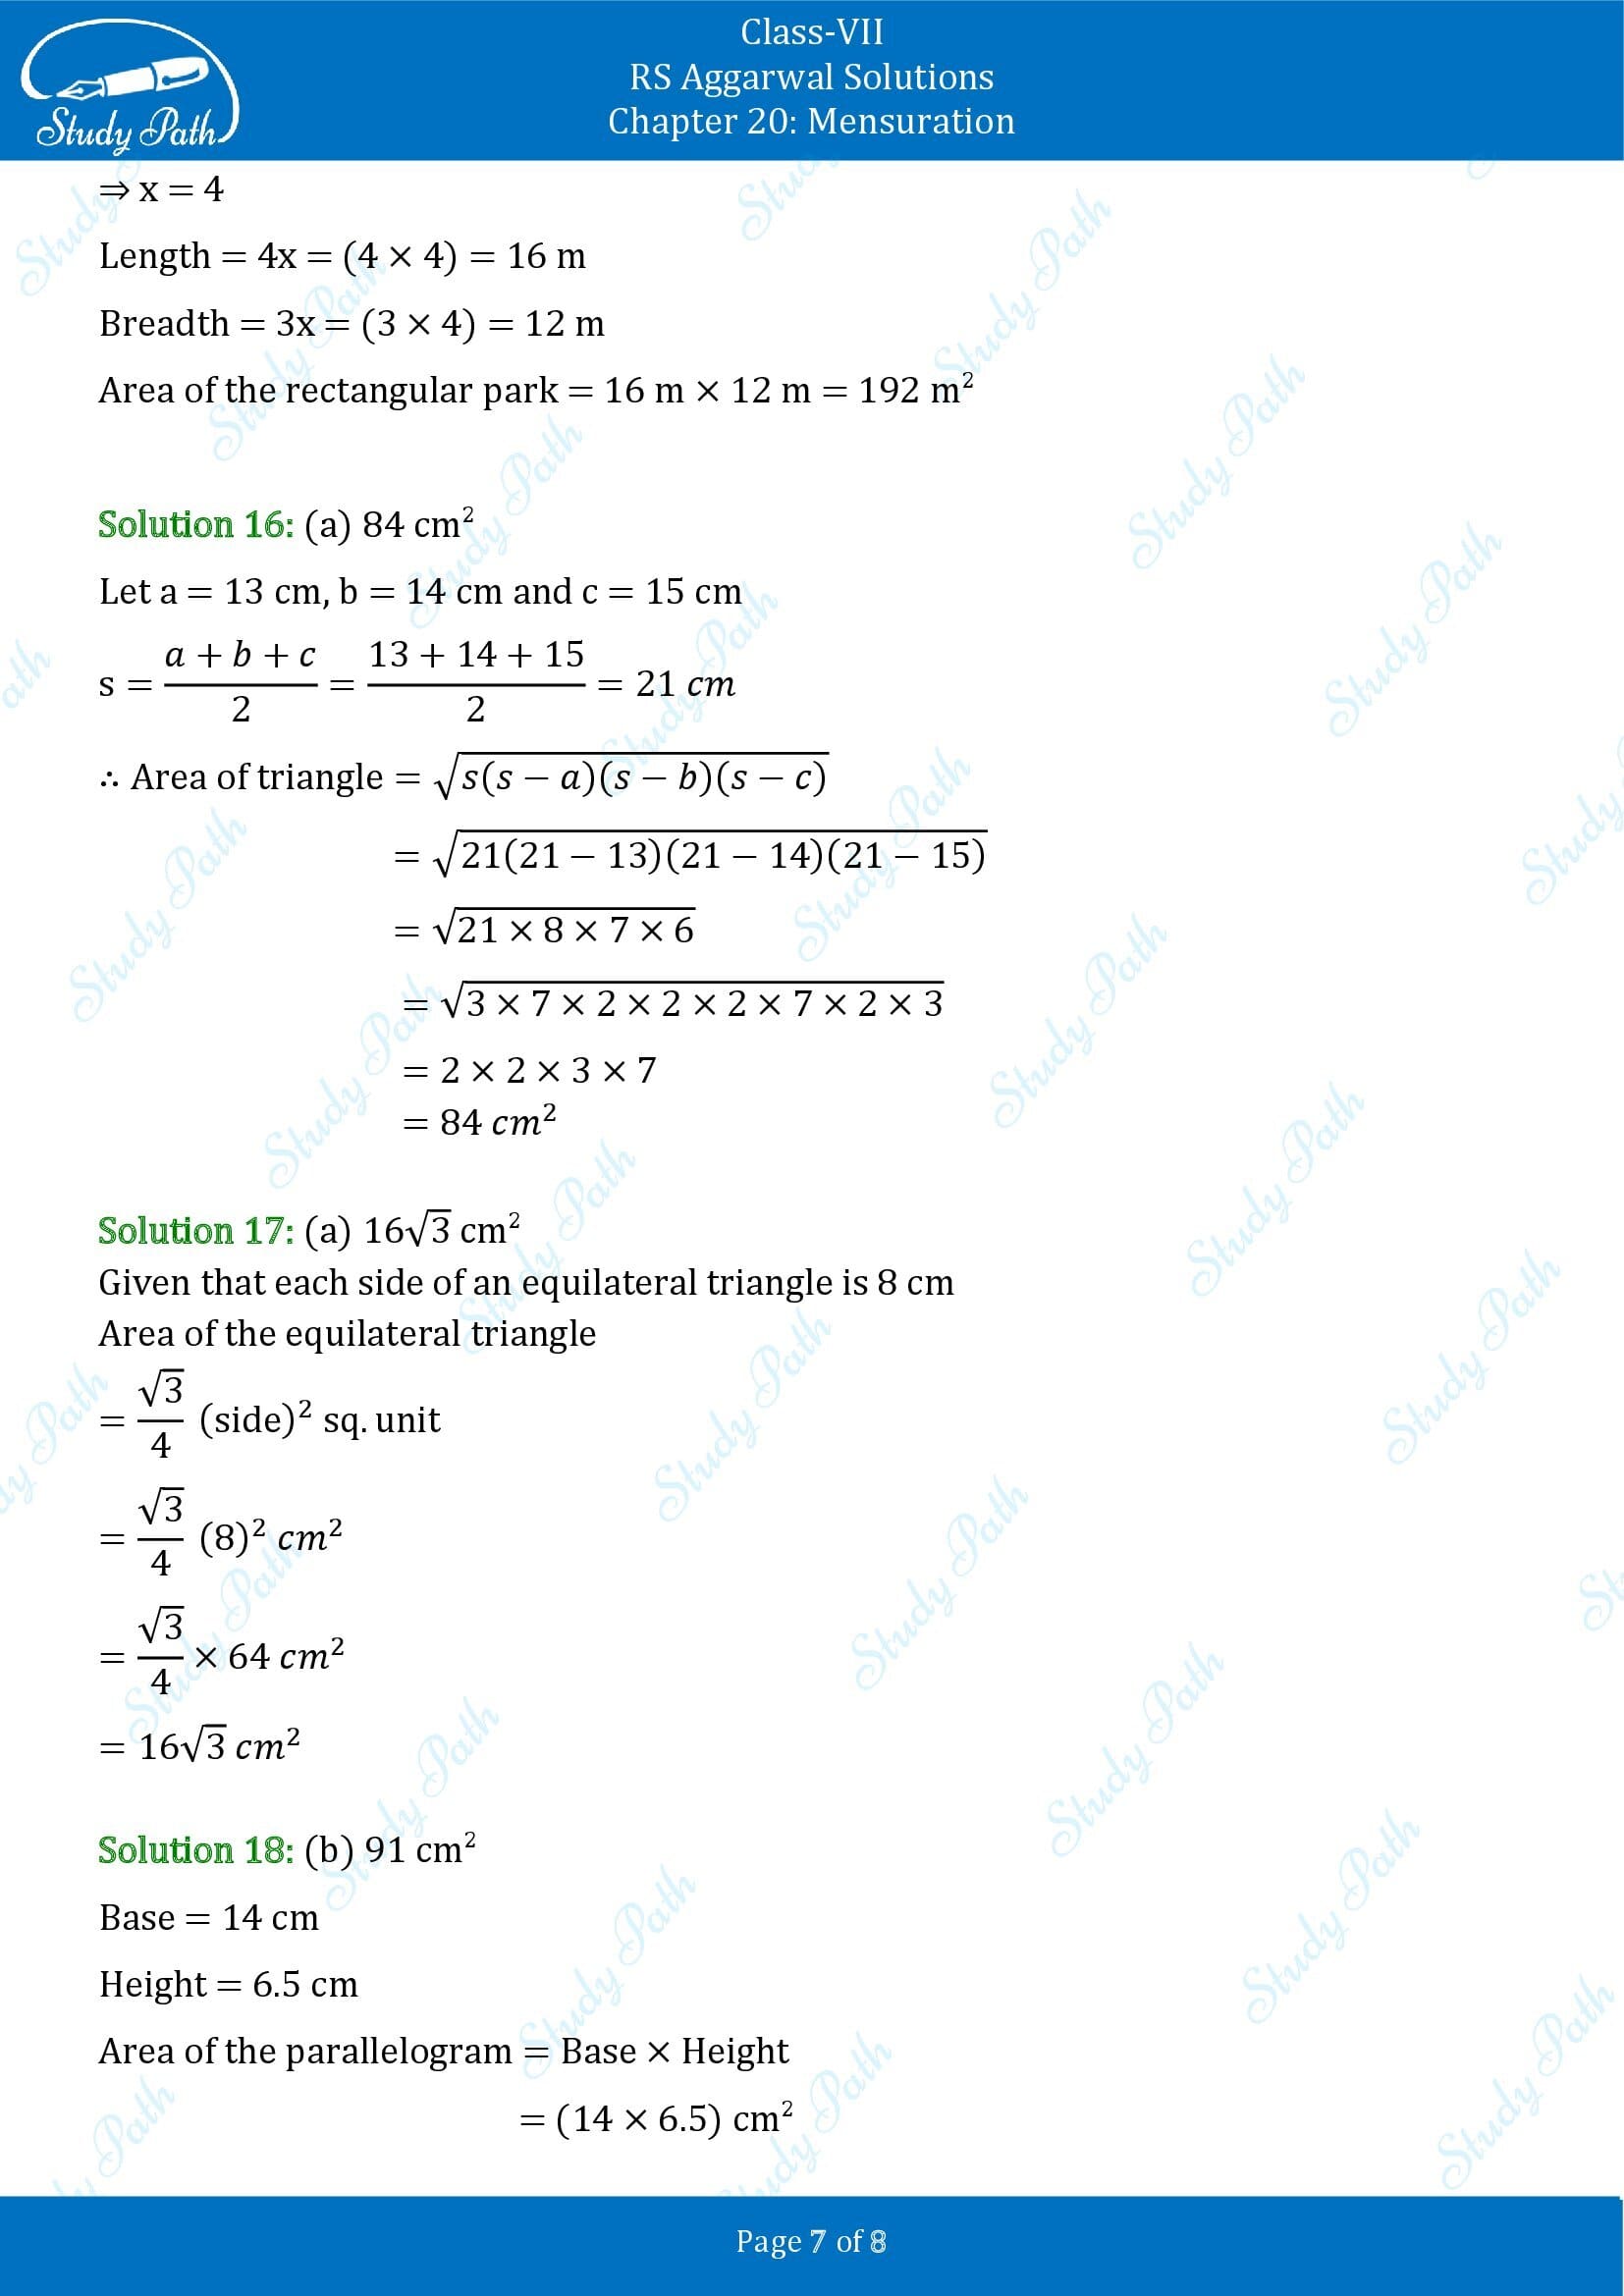 RS Aggarwal Solutions Class 7 Chapter 20 Mensuration Test Paper 20 0007